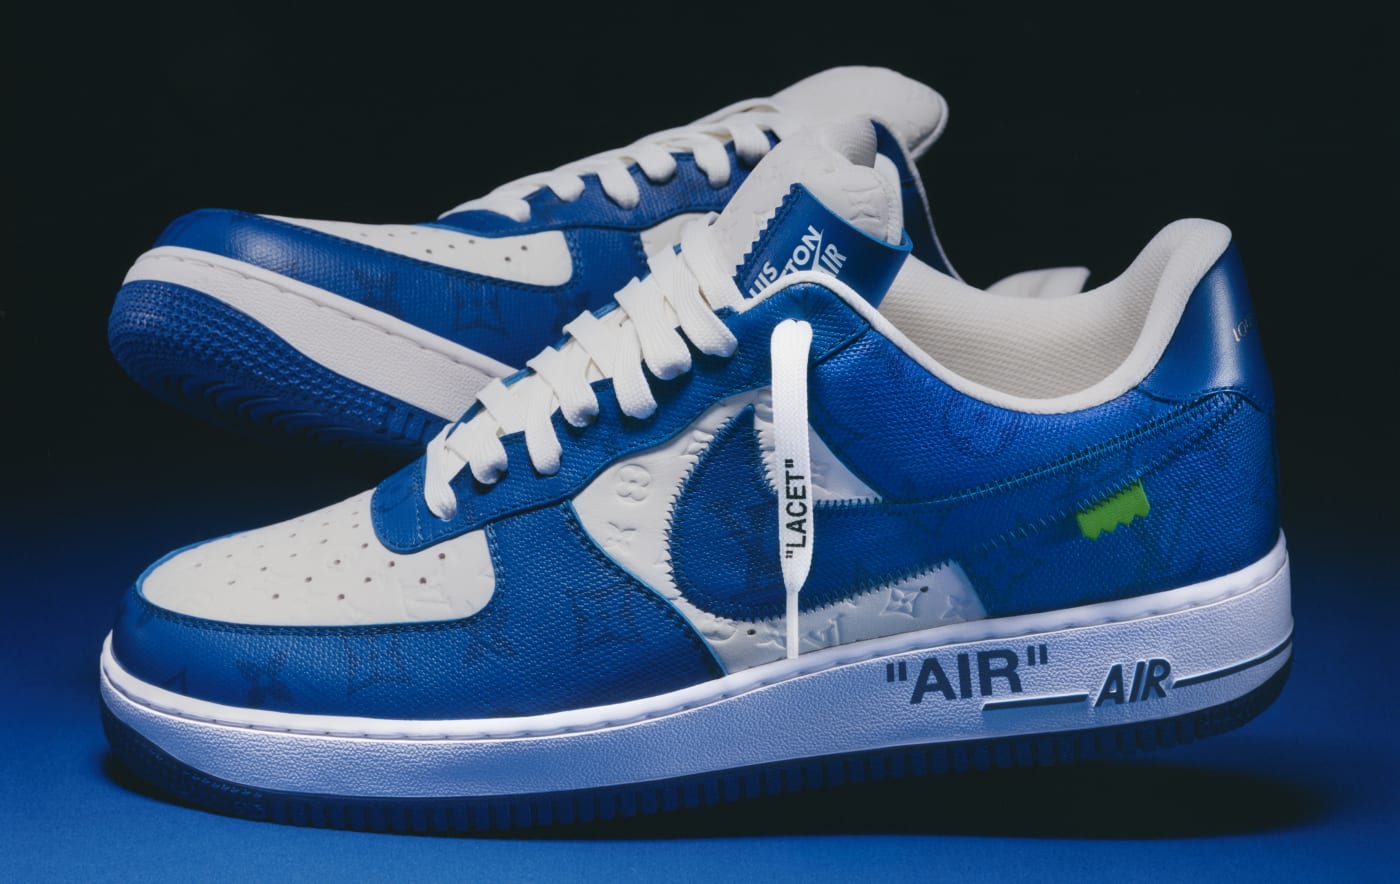 white and blue air force 1s